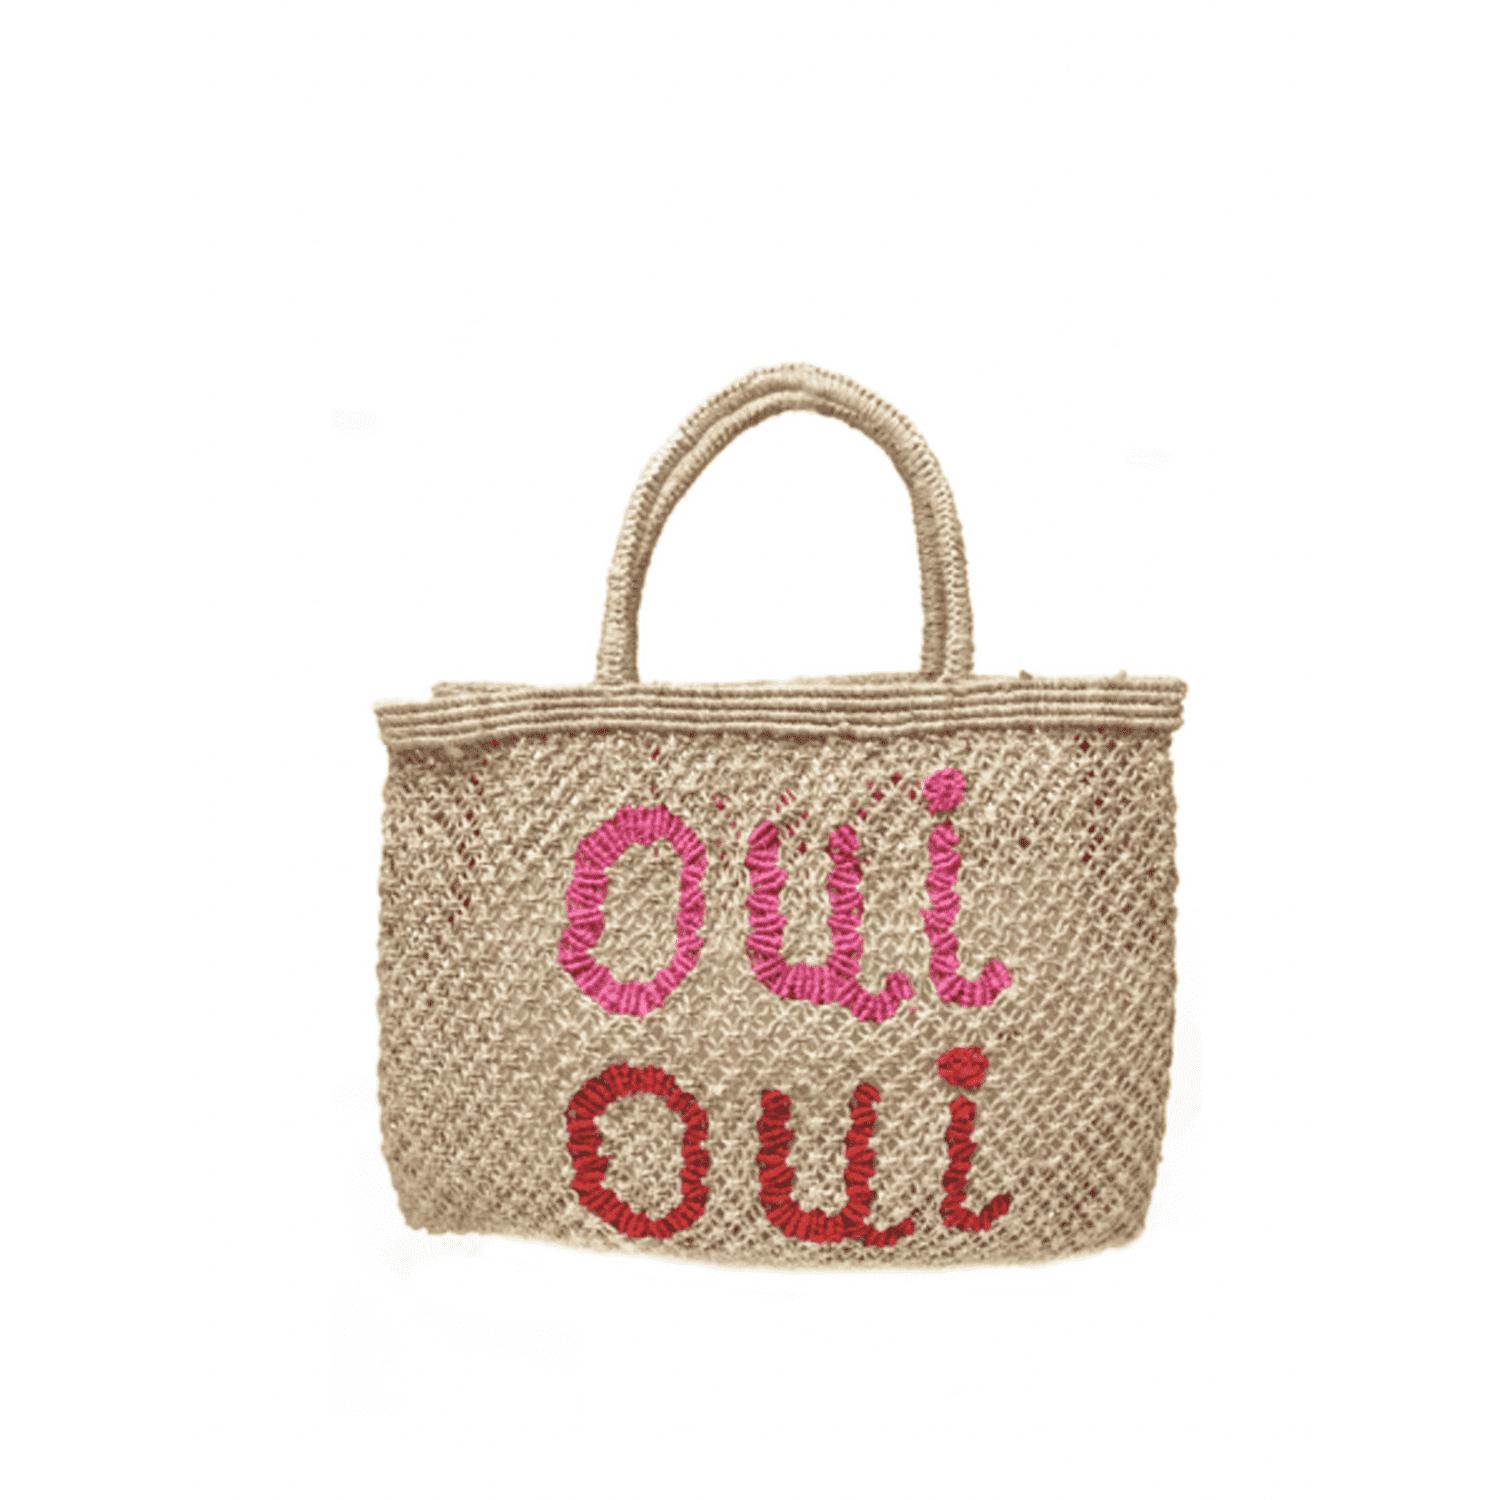 The Jacksons Natural And Hot Pink Oui Oui Jute Bag